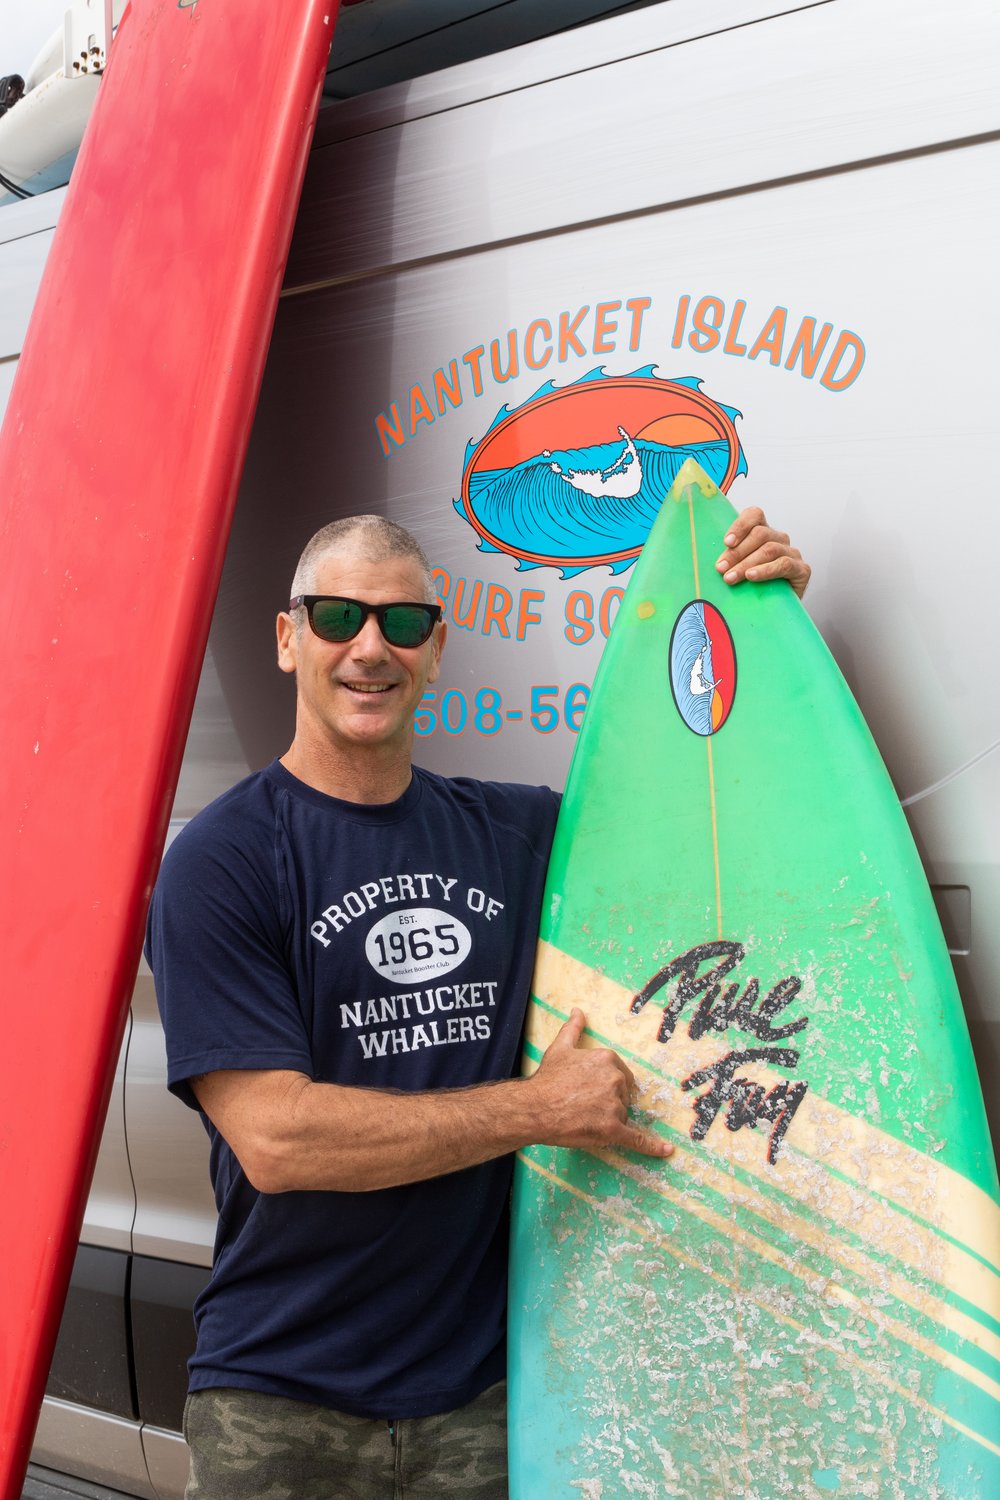 Island surfers Gary Kohner, above, and Luke Johnson pulled a Maine man from the water off Wellfleet last week, but attempts to revive him were unsuccessful.